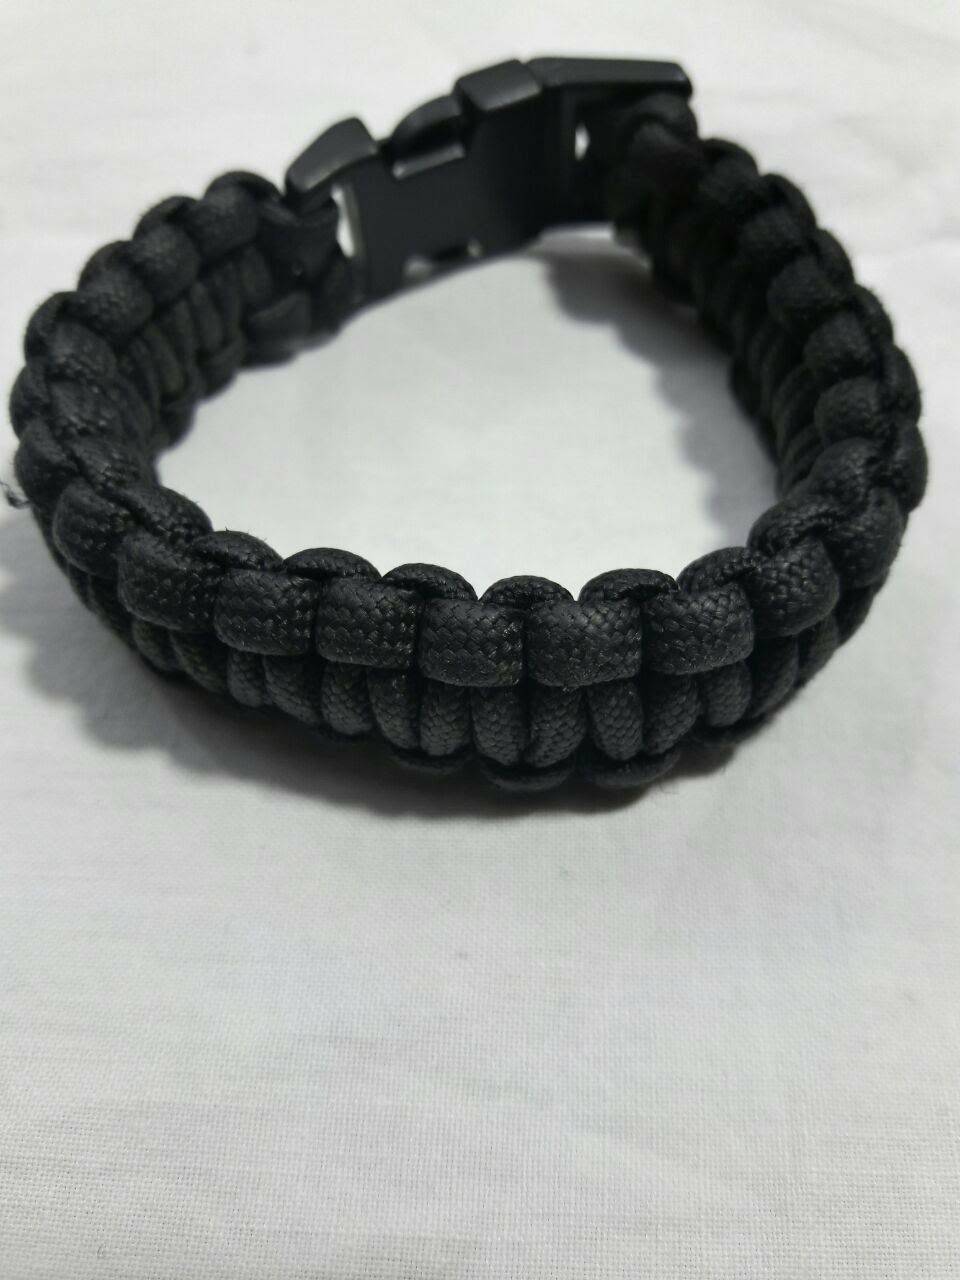 IceCove Paracord Creations | 321 Tara Ave, Cottage Hills, IL 62018 | Phone: (314) 643-6829